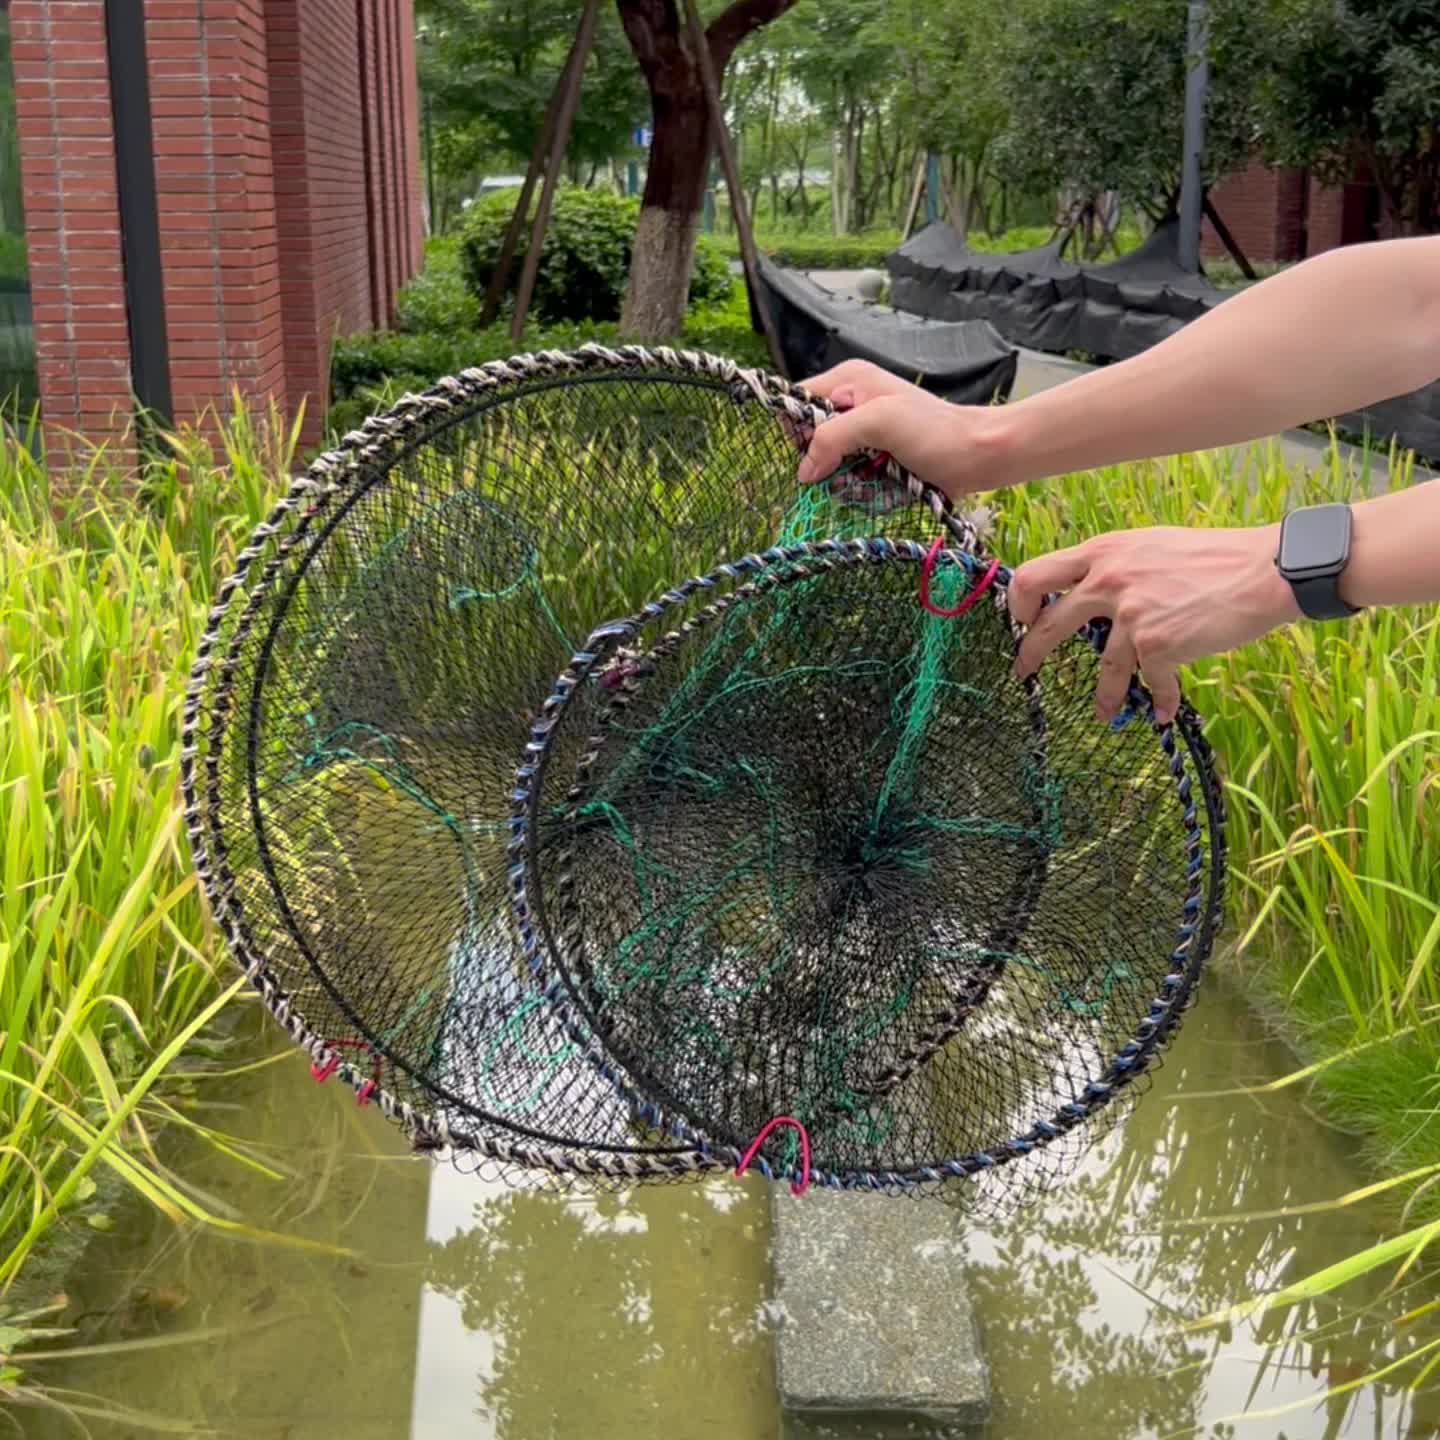 Foldable Drop Large Net Fishing Nylon Durable Landing Prawn Bait Crab  Shrimp Fish Trap Cast Network Tools Accessories8001570 From Anqo, $16.1